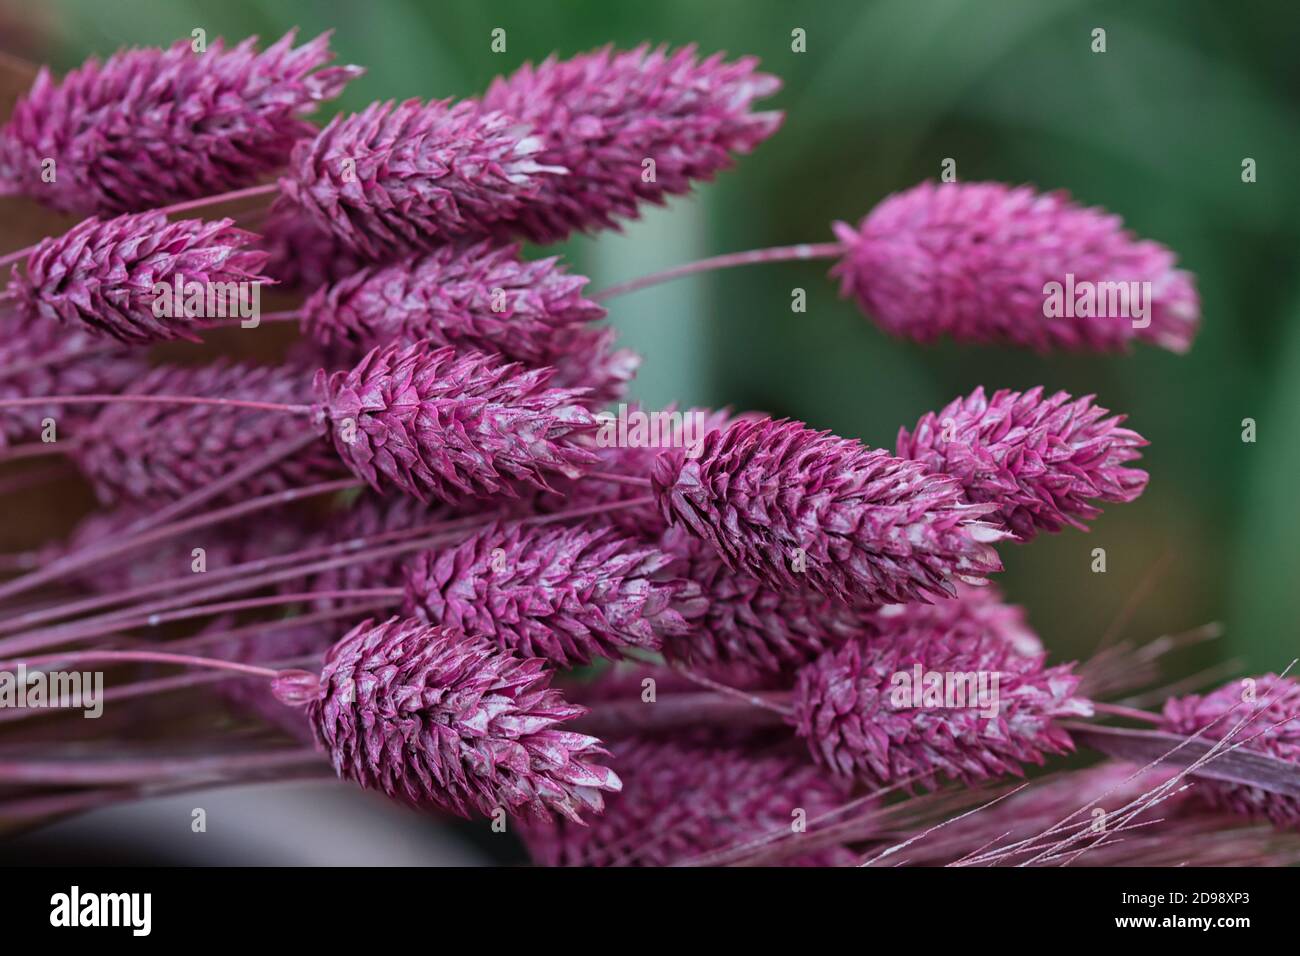 Pink mauve ornamental grass flowers close up, dry bunnytail texture on a dark green blurred background, artistic Stock Photo